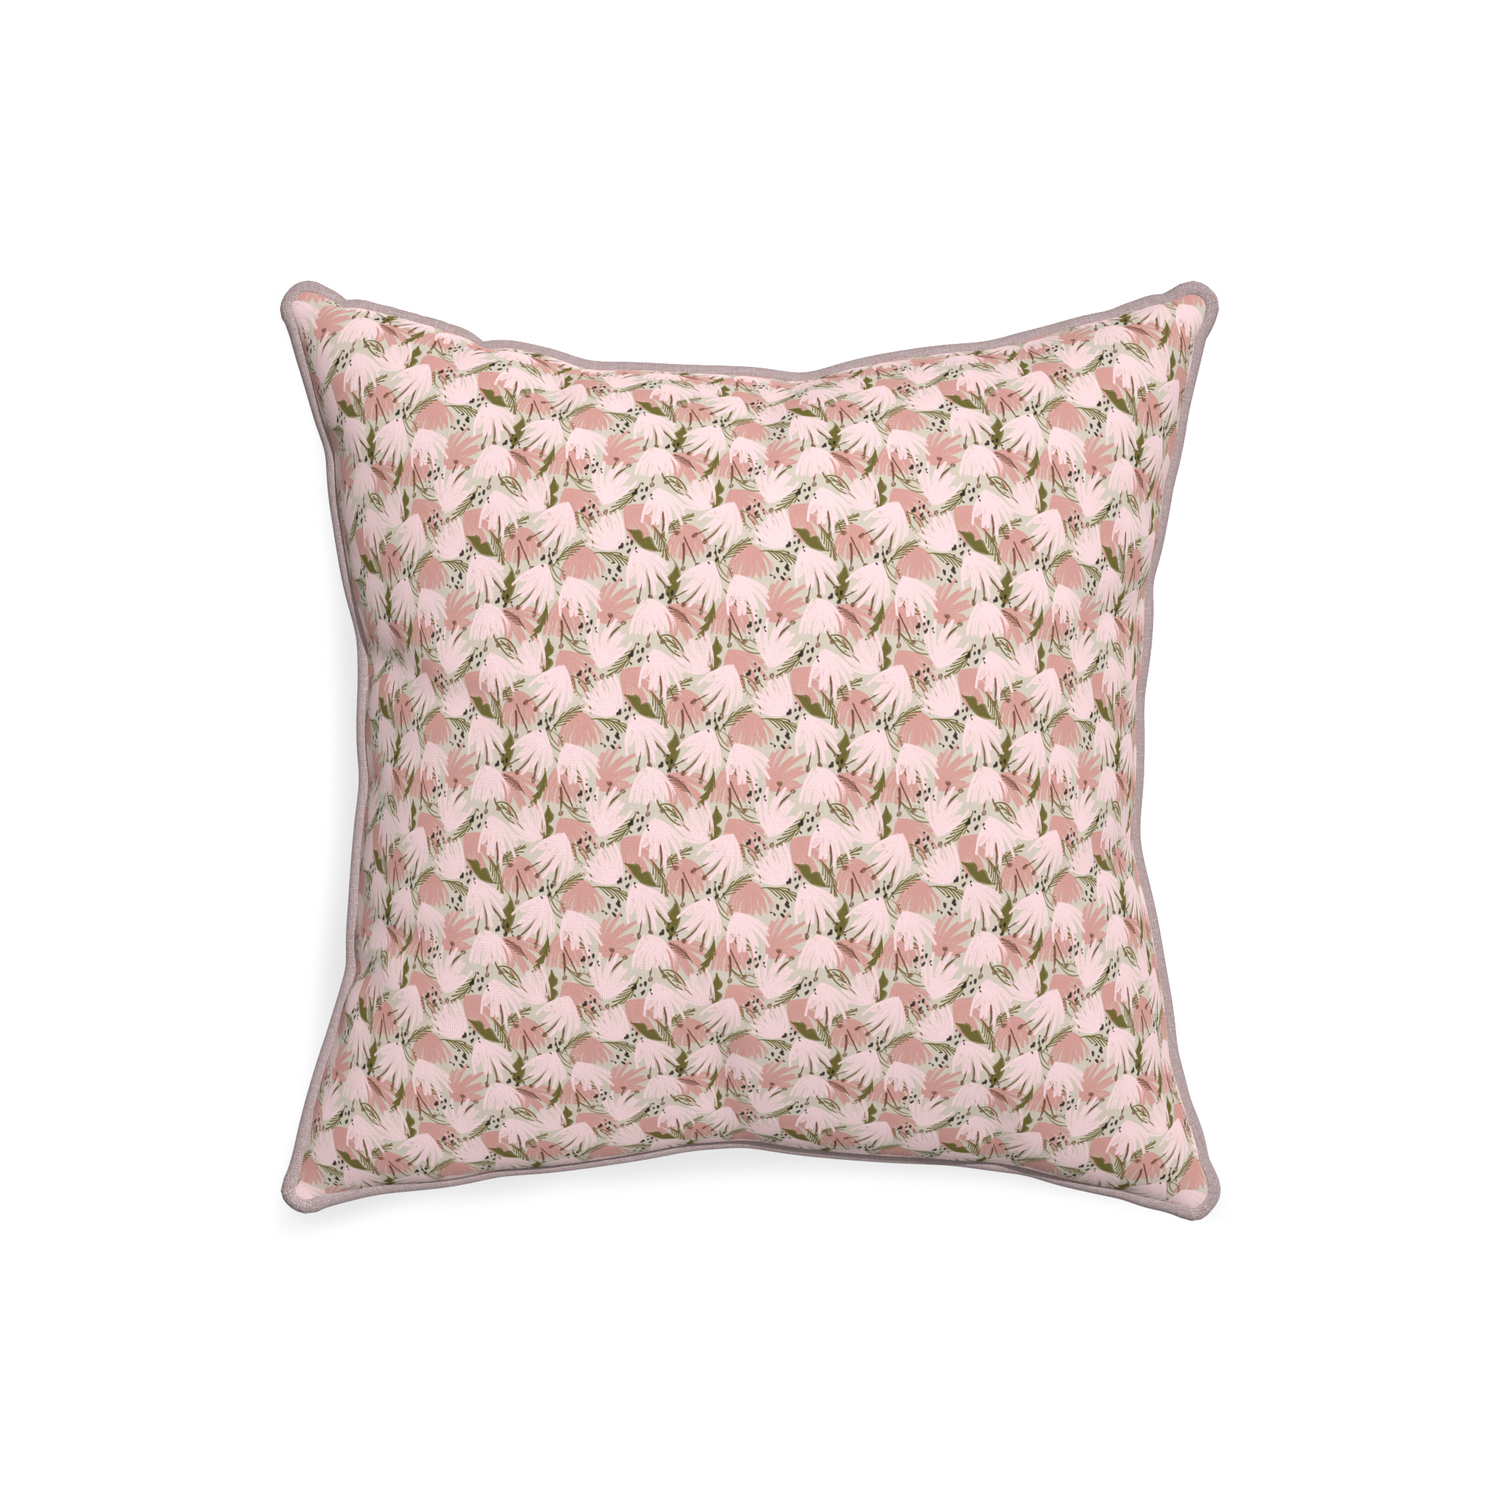 20-square eden pink custom pink floralpillow with orchid piping on white background